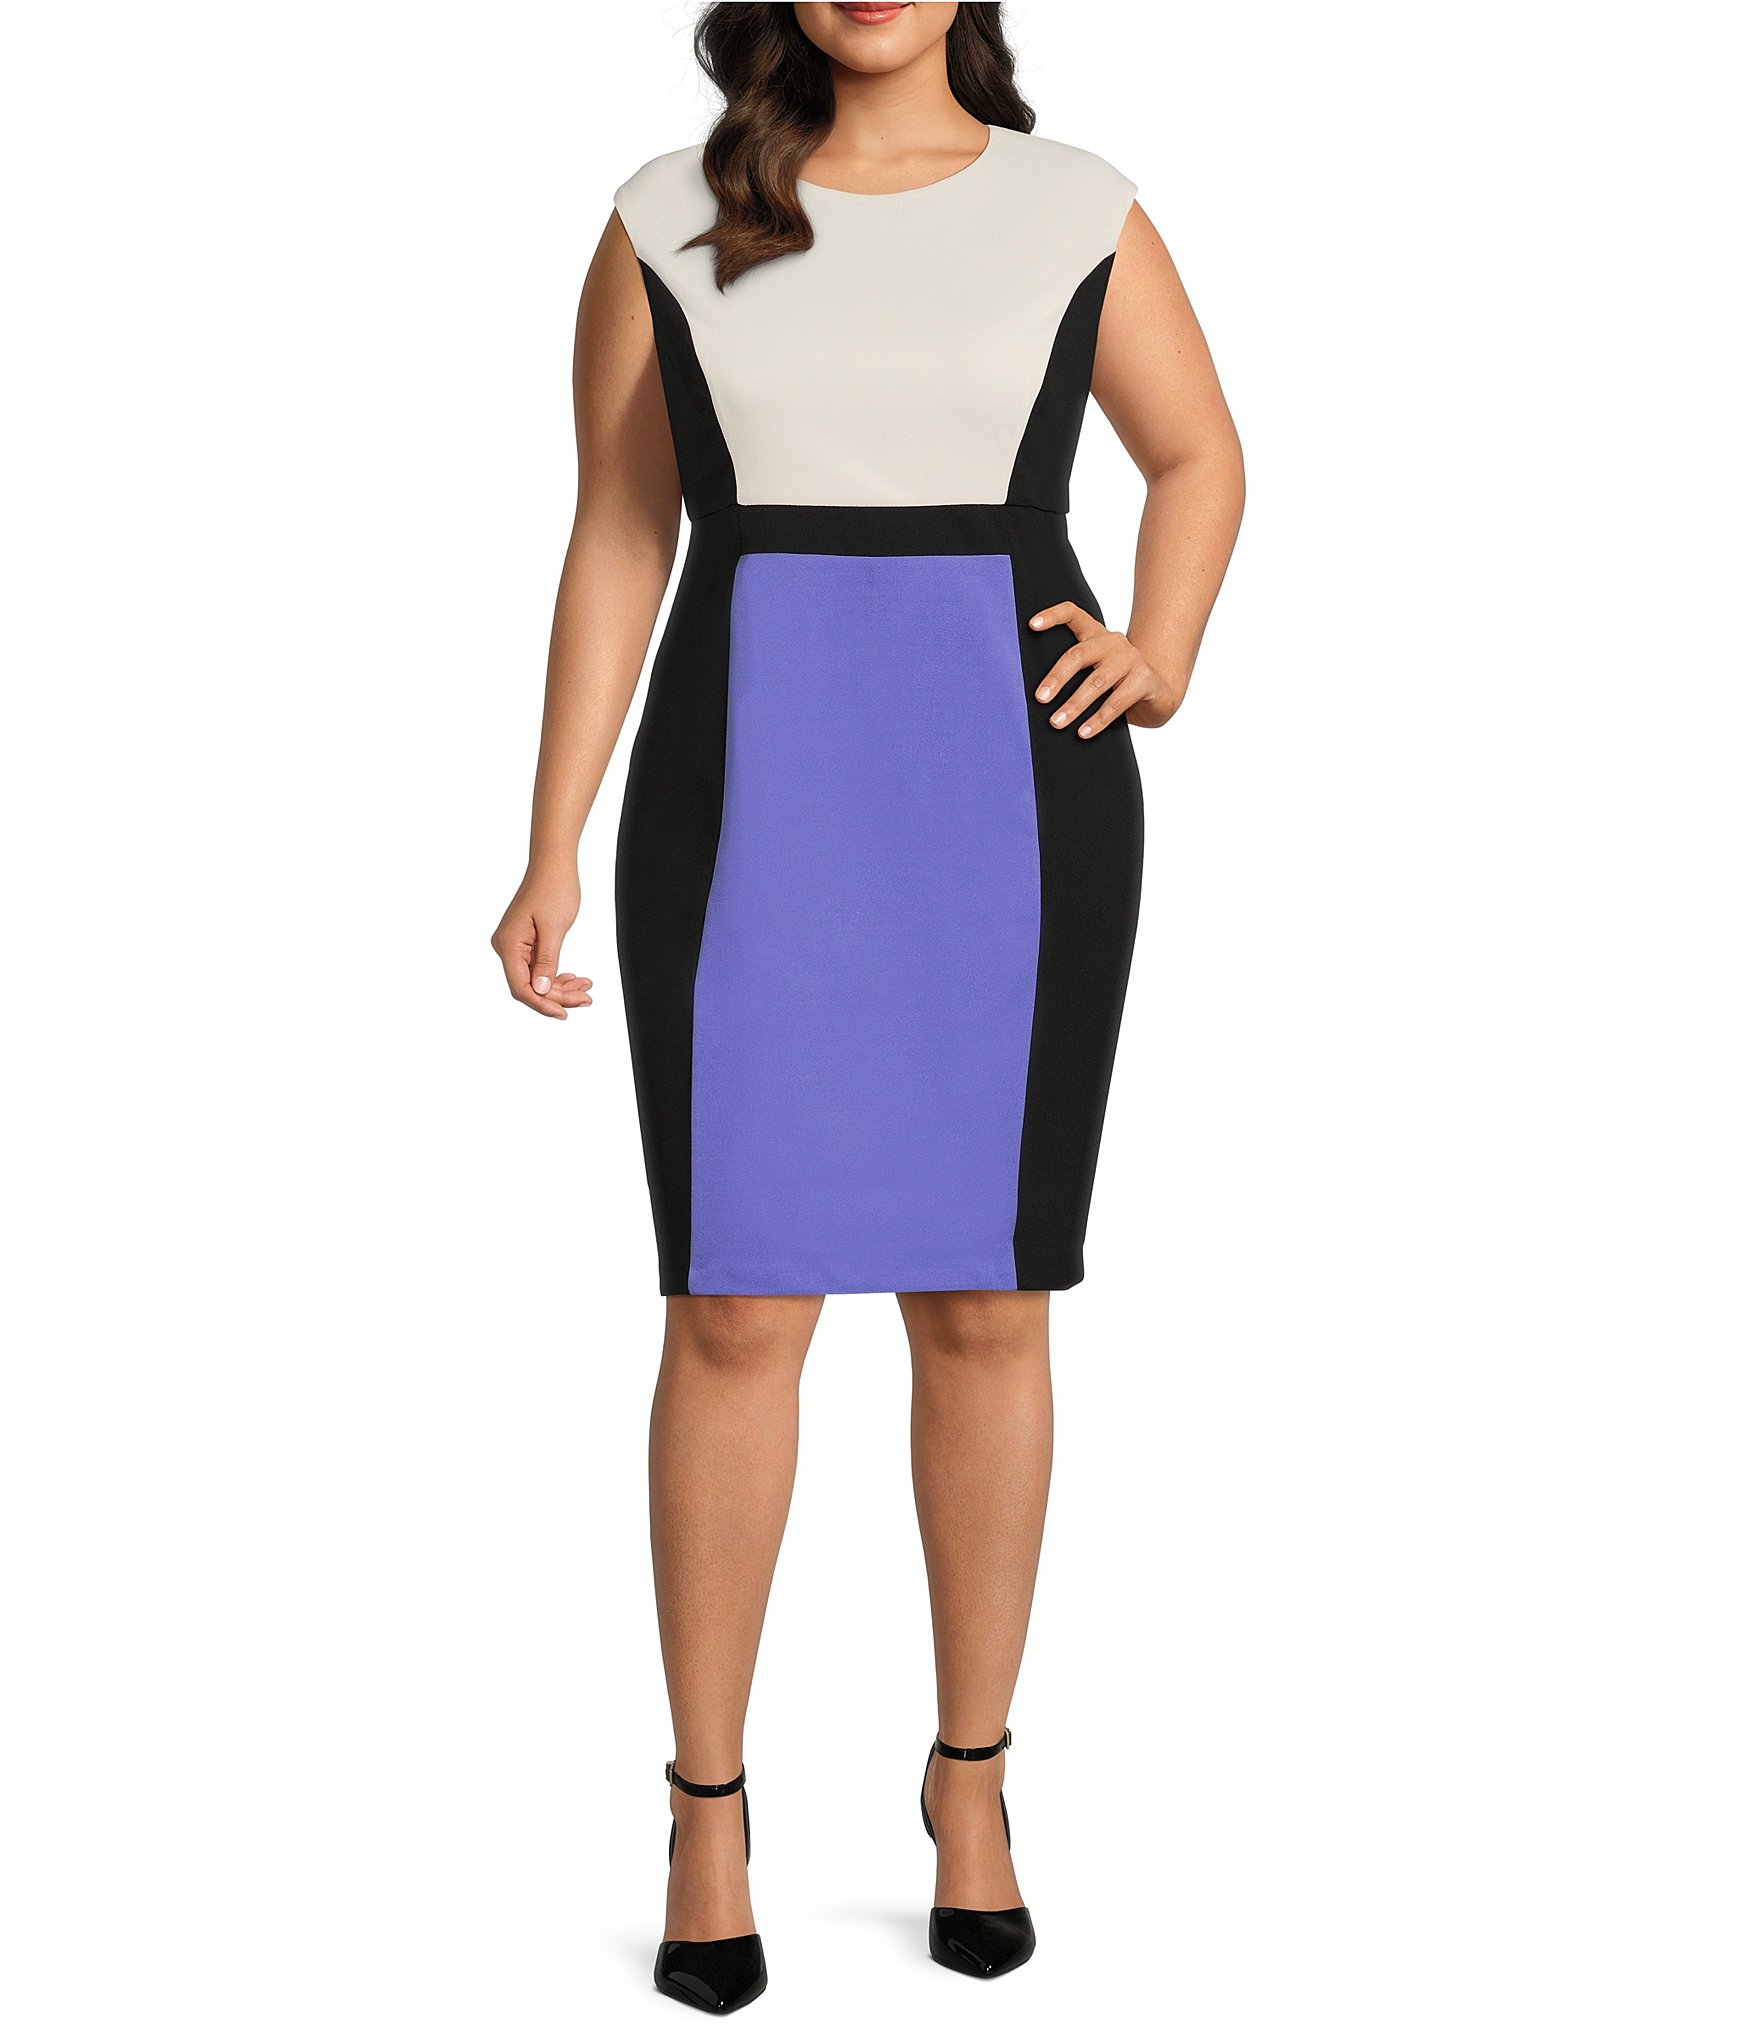 Plus Size Work Dresses - Plus Size Work Clothes - Sumissura